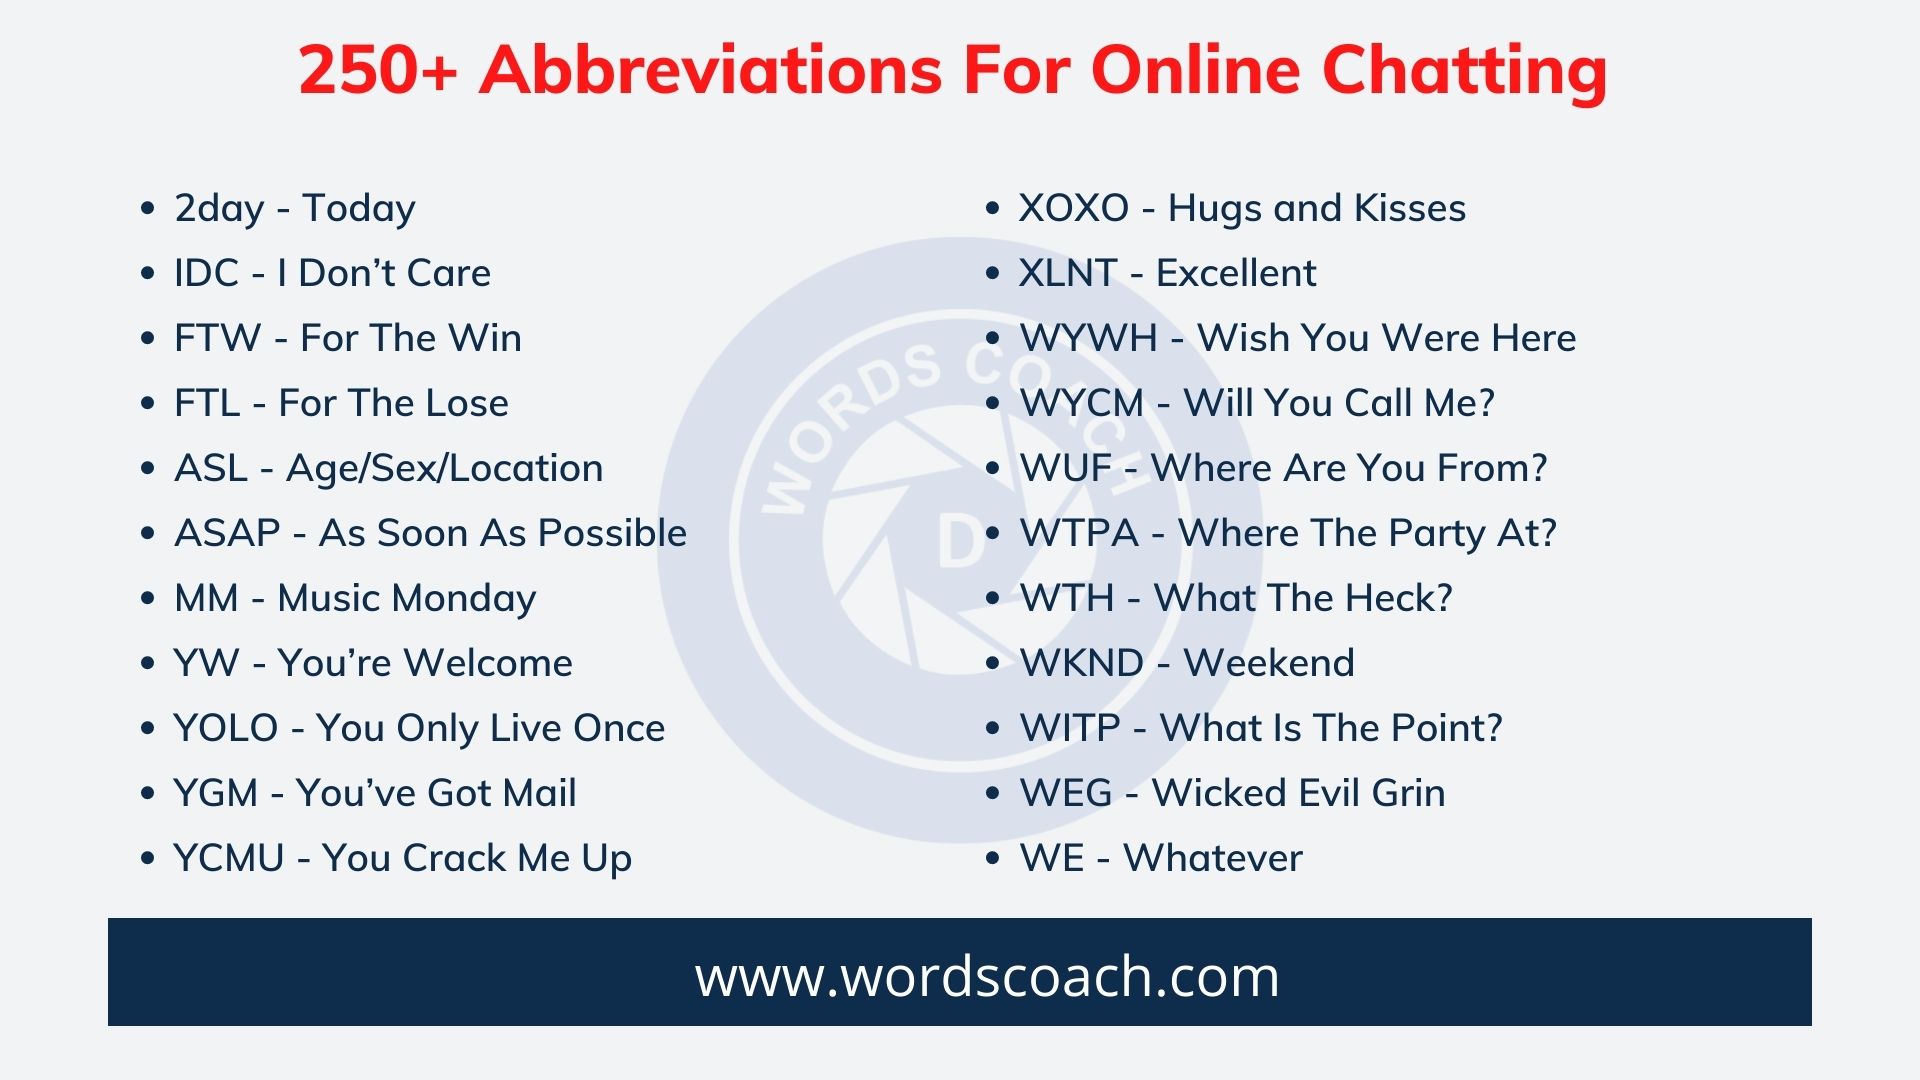 250+ Abbreviations For Online Chatting